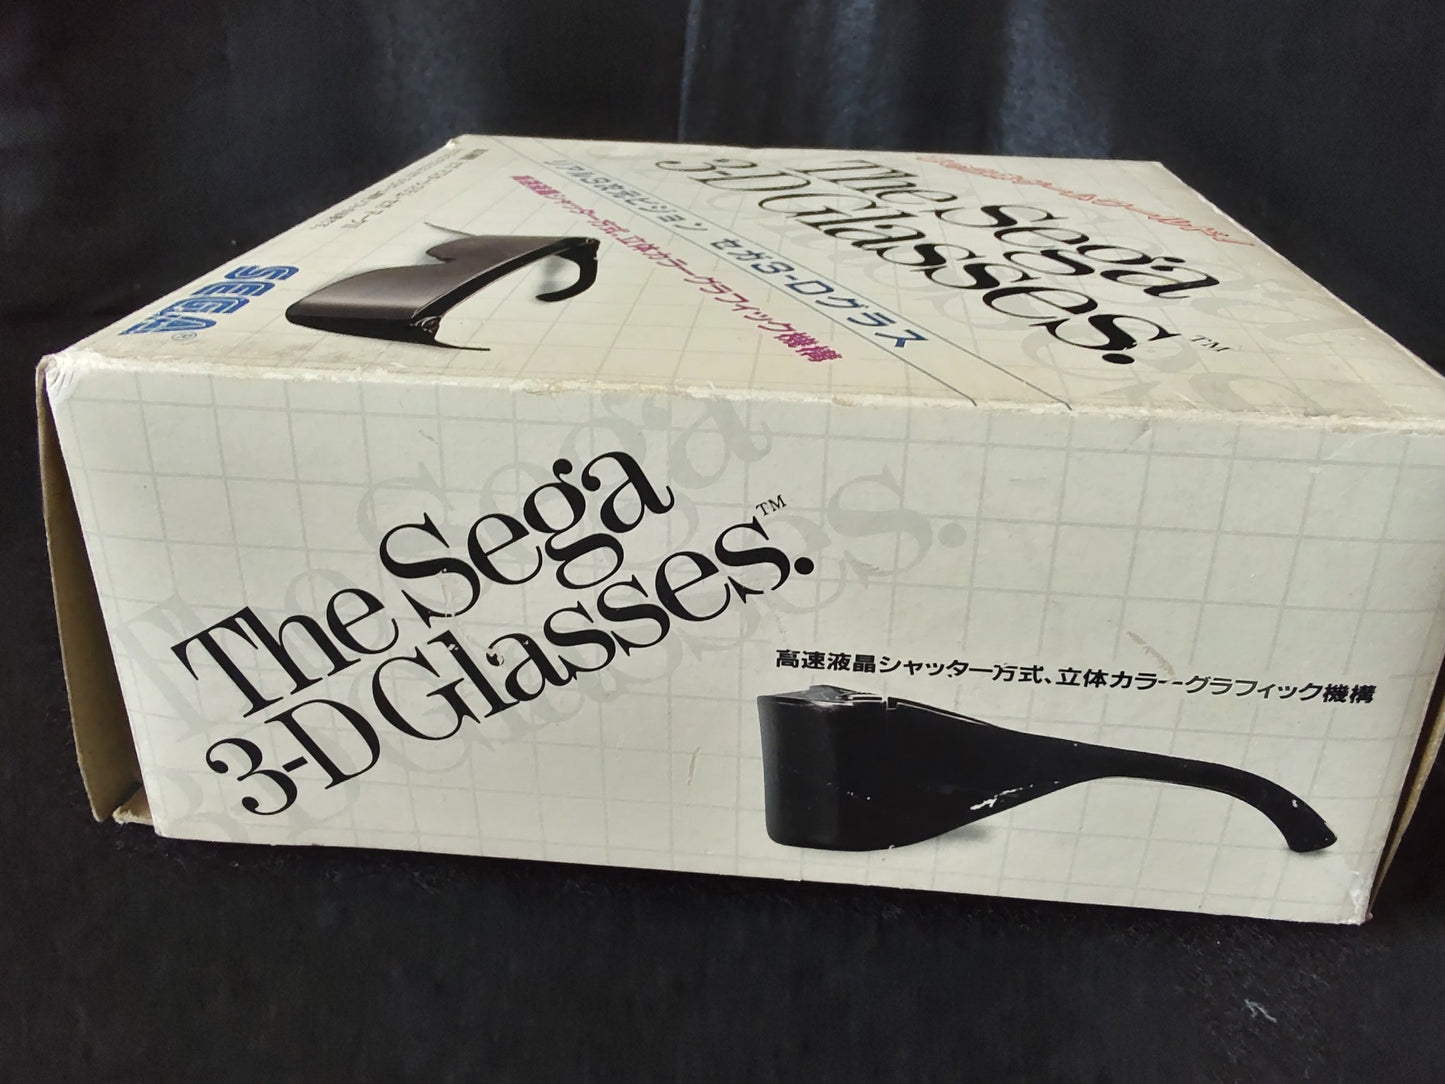 SEGA 3D glasses for Master system console w/3D Adapter, Box set,not tested-f0427